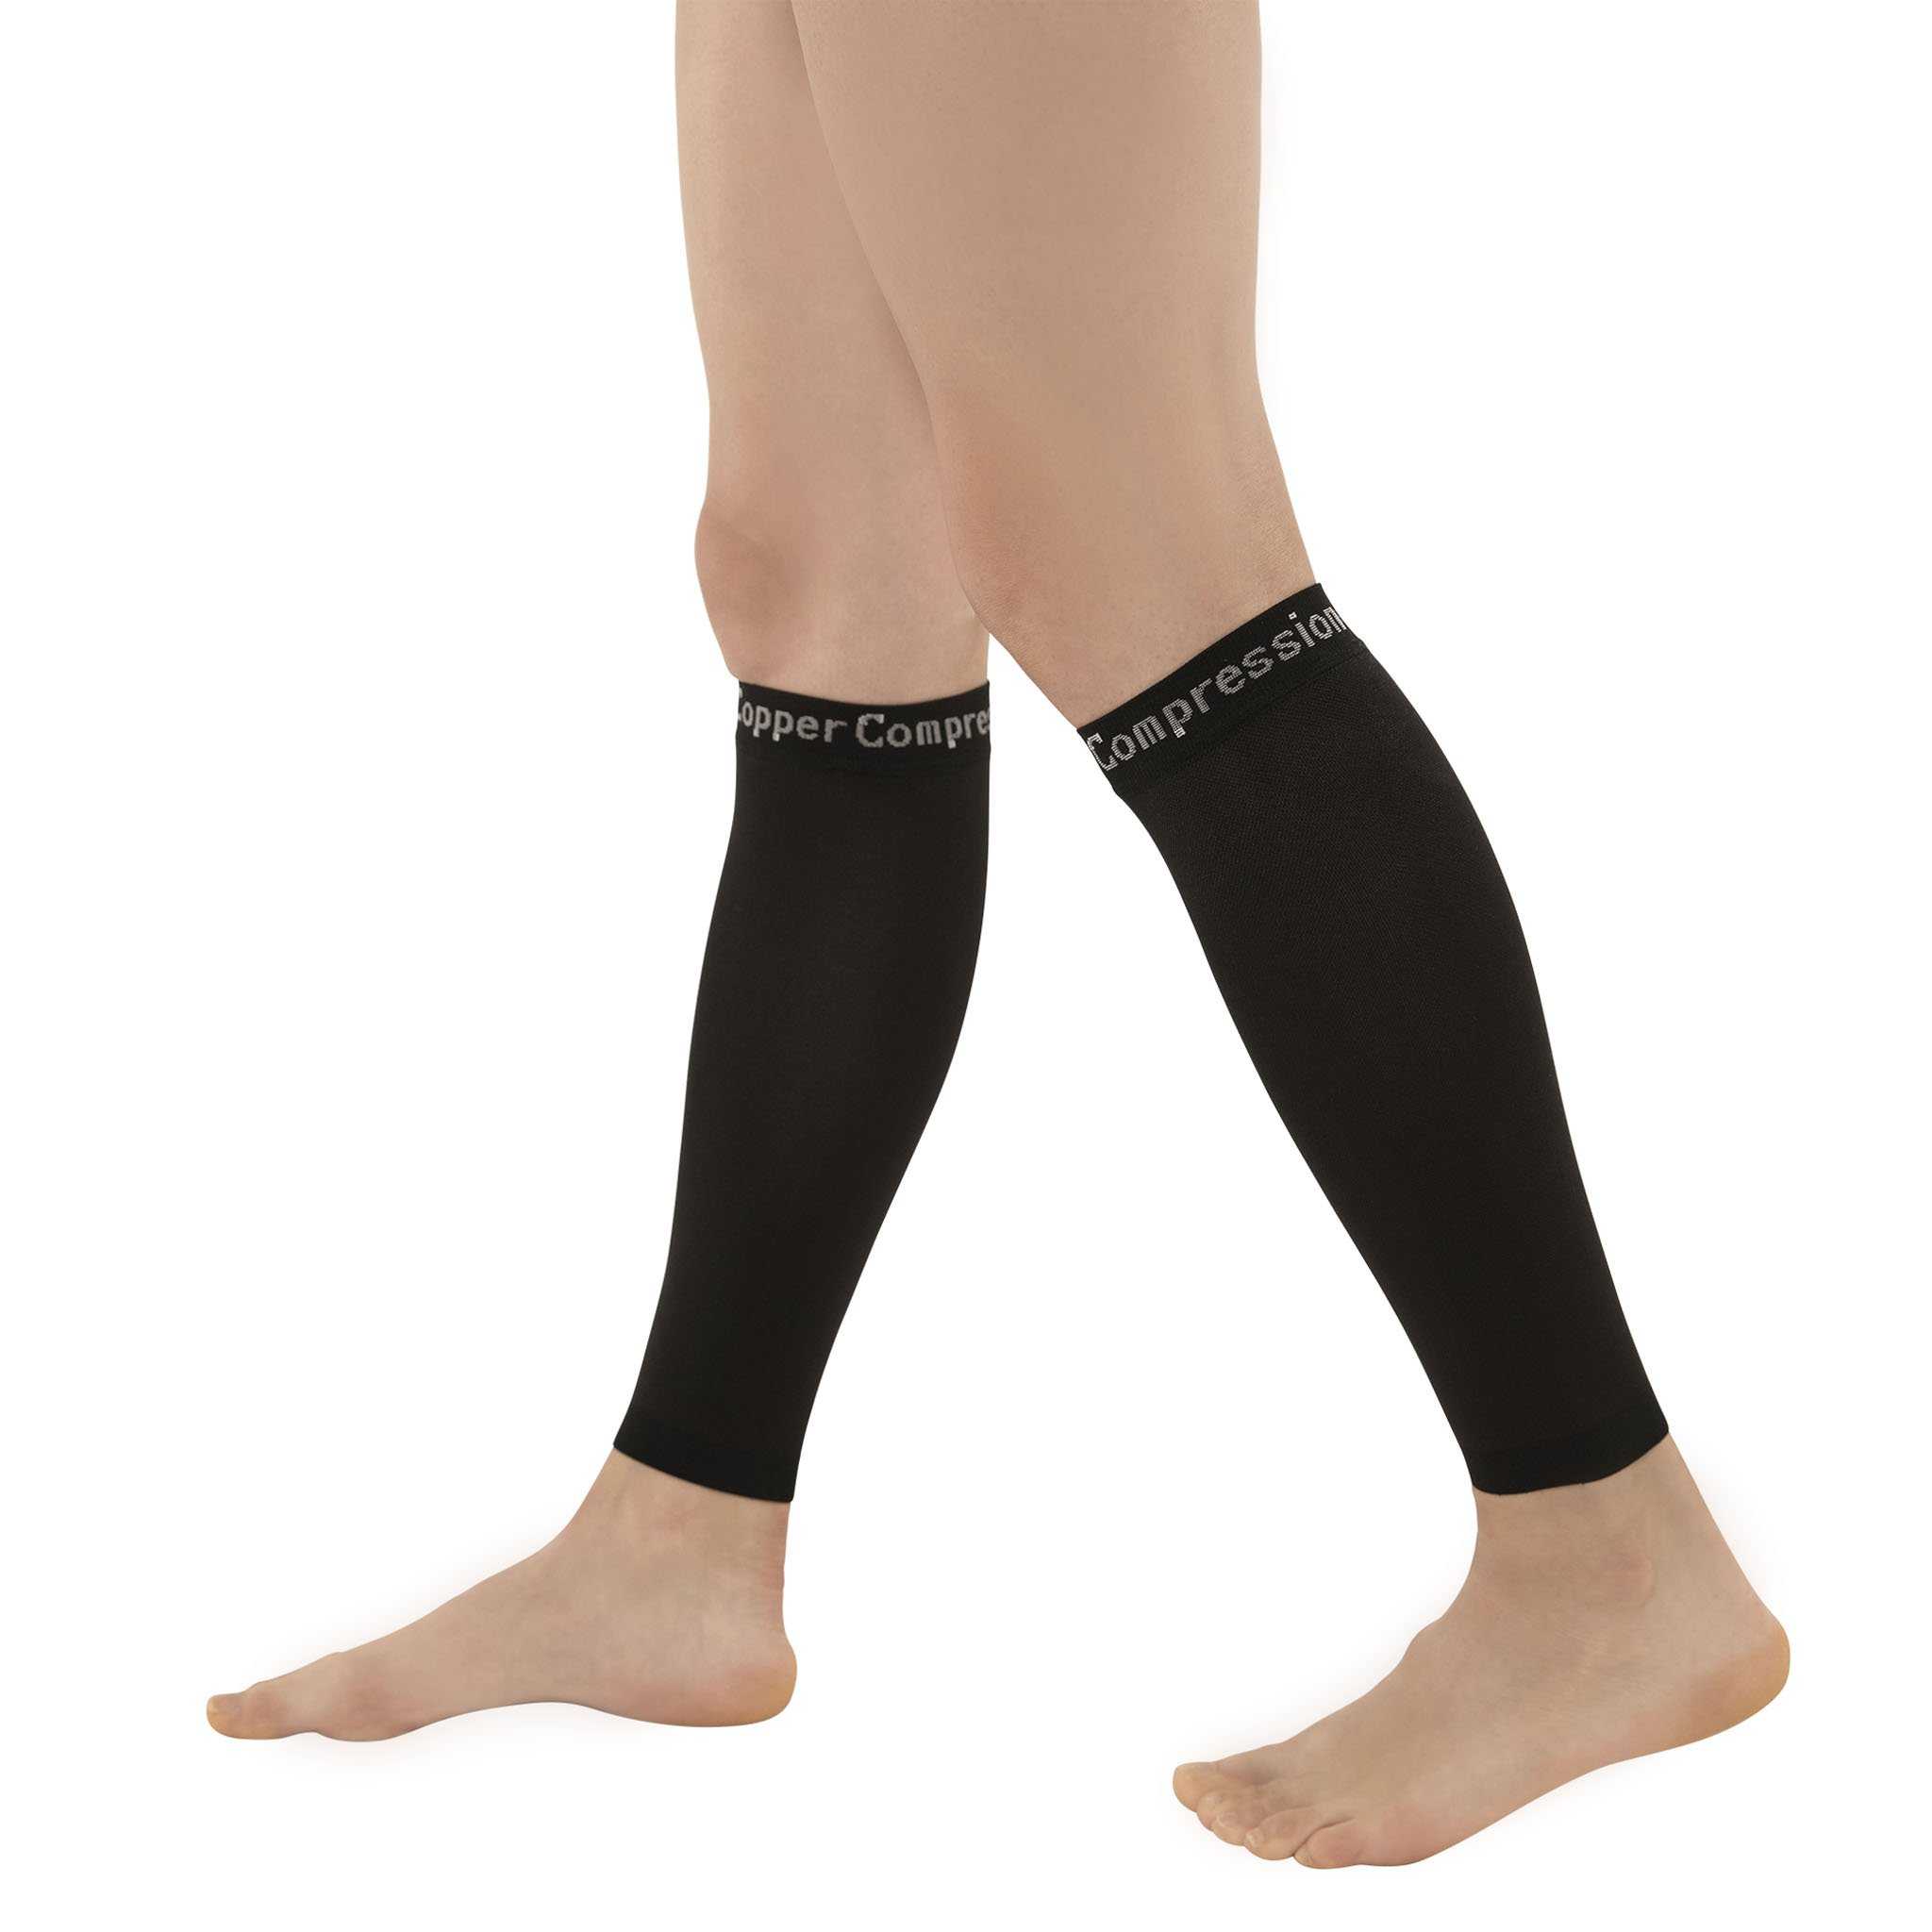  Copper Compression Calf Sleeves - Footless Compression Socks  for Running, Cycling & Fitness. Orthopedic Brace for Shin Splints, Varicose  Veins, Arthritis, Sprains, Strains (1 Pair Large) : Health & Household